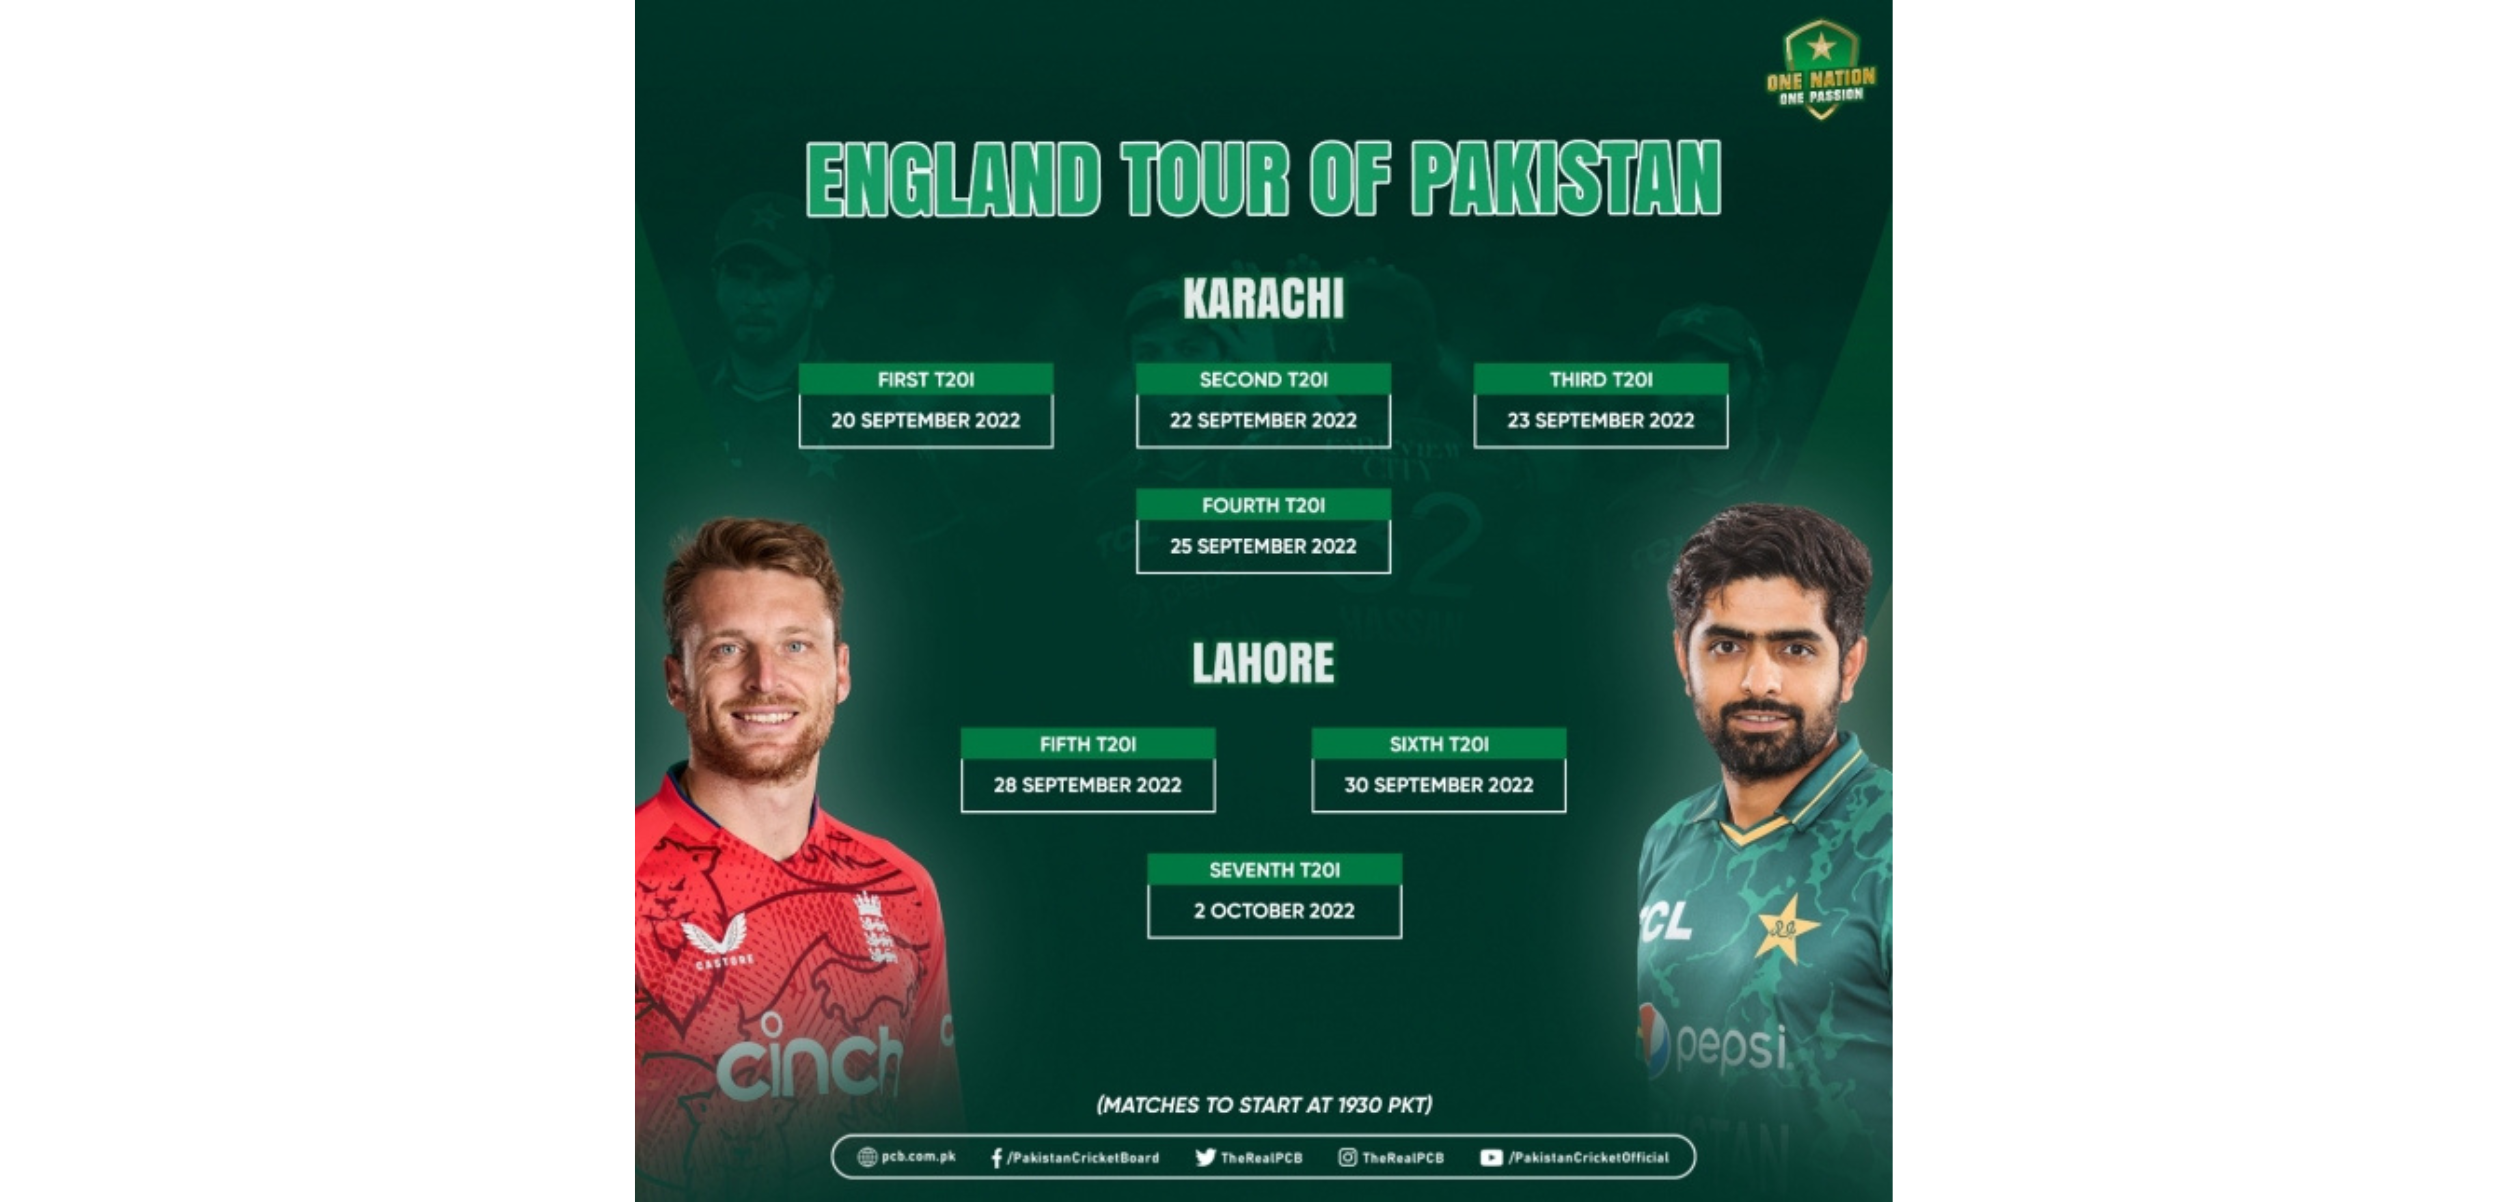 PCB: England to launch Pakistan's bumper season in Karachi and Lahore